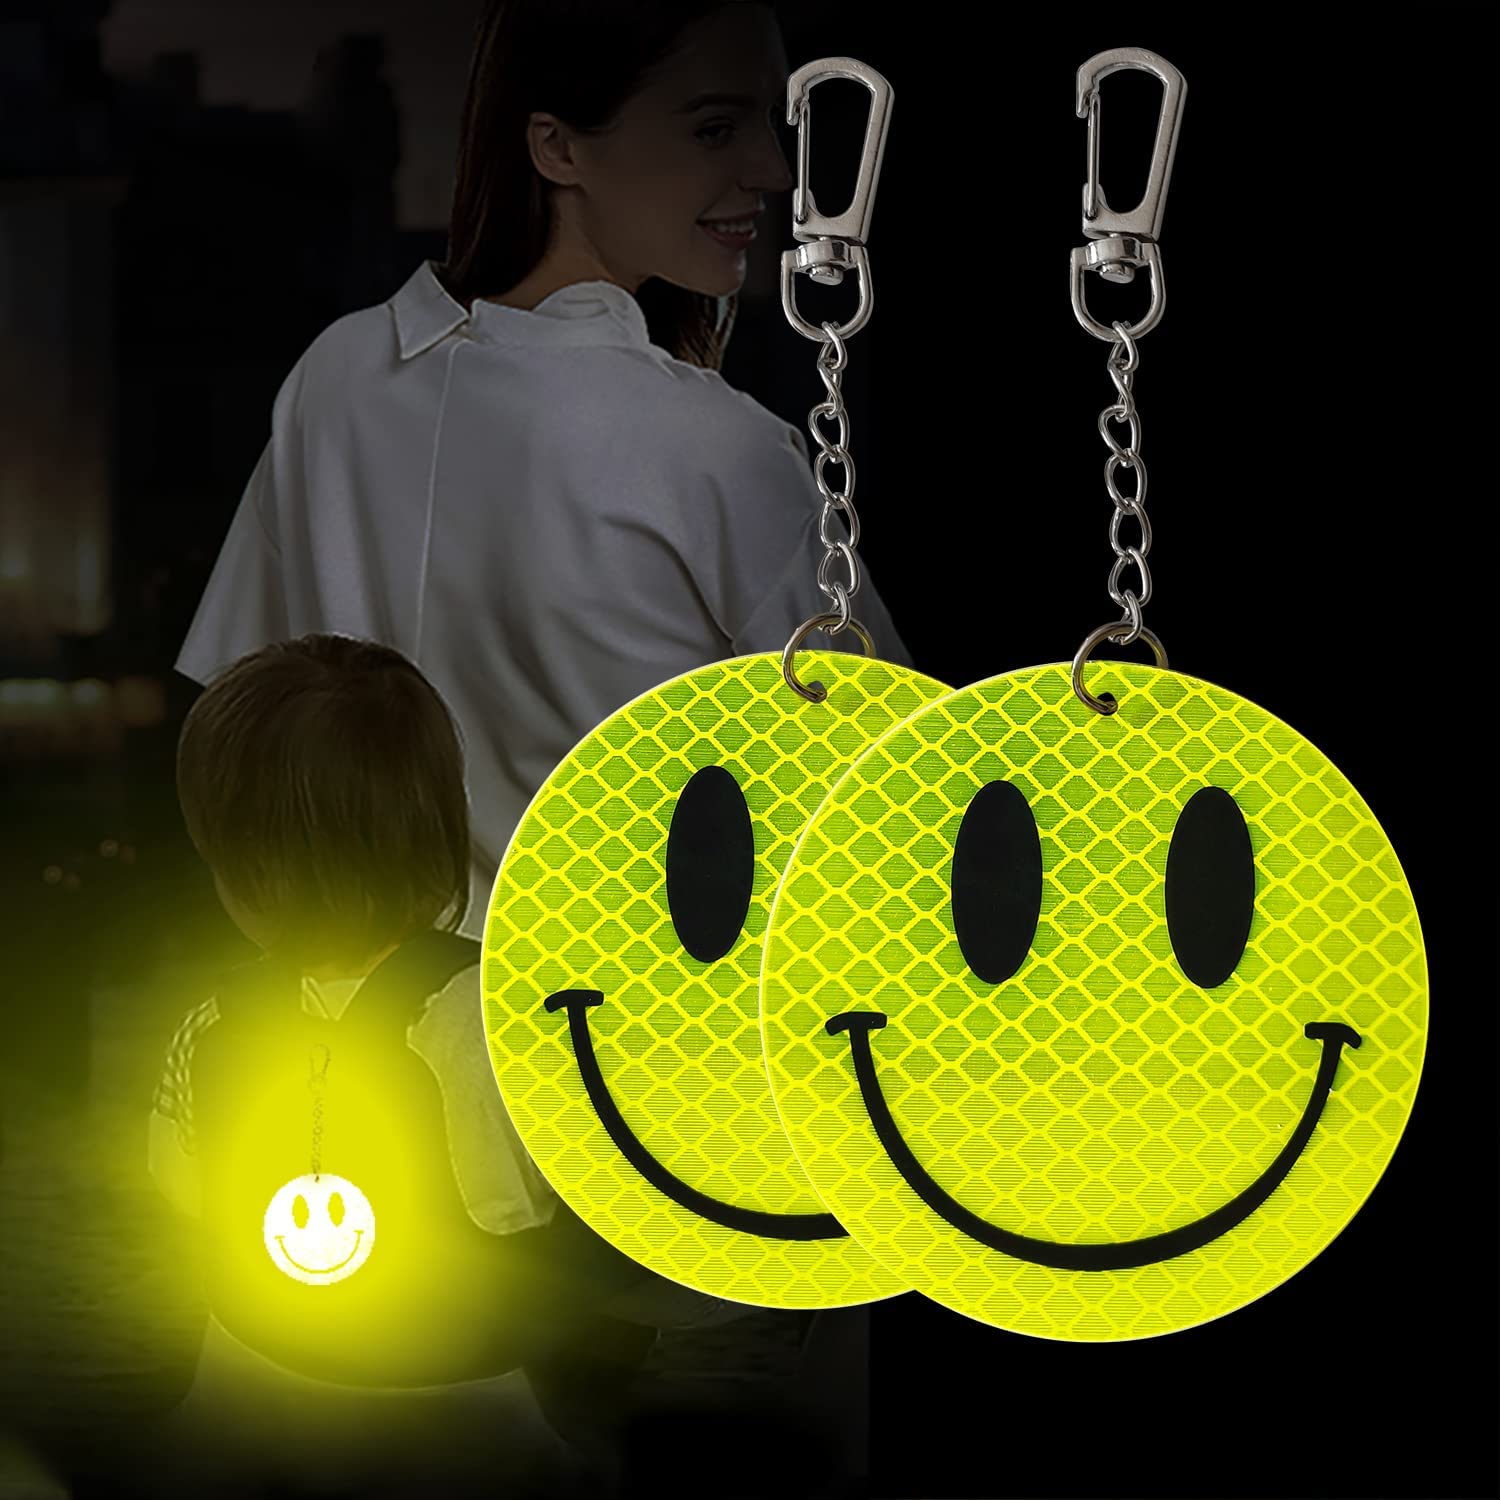 PVC Backpack Pendant Reflective Keychain for Children Walking at Night